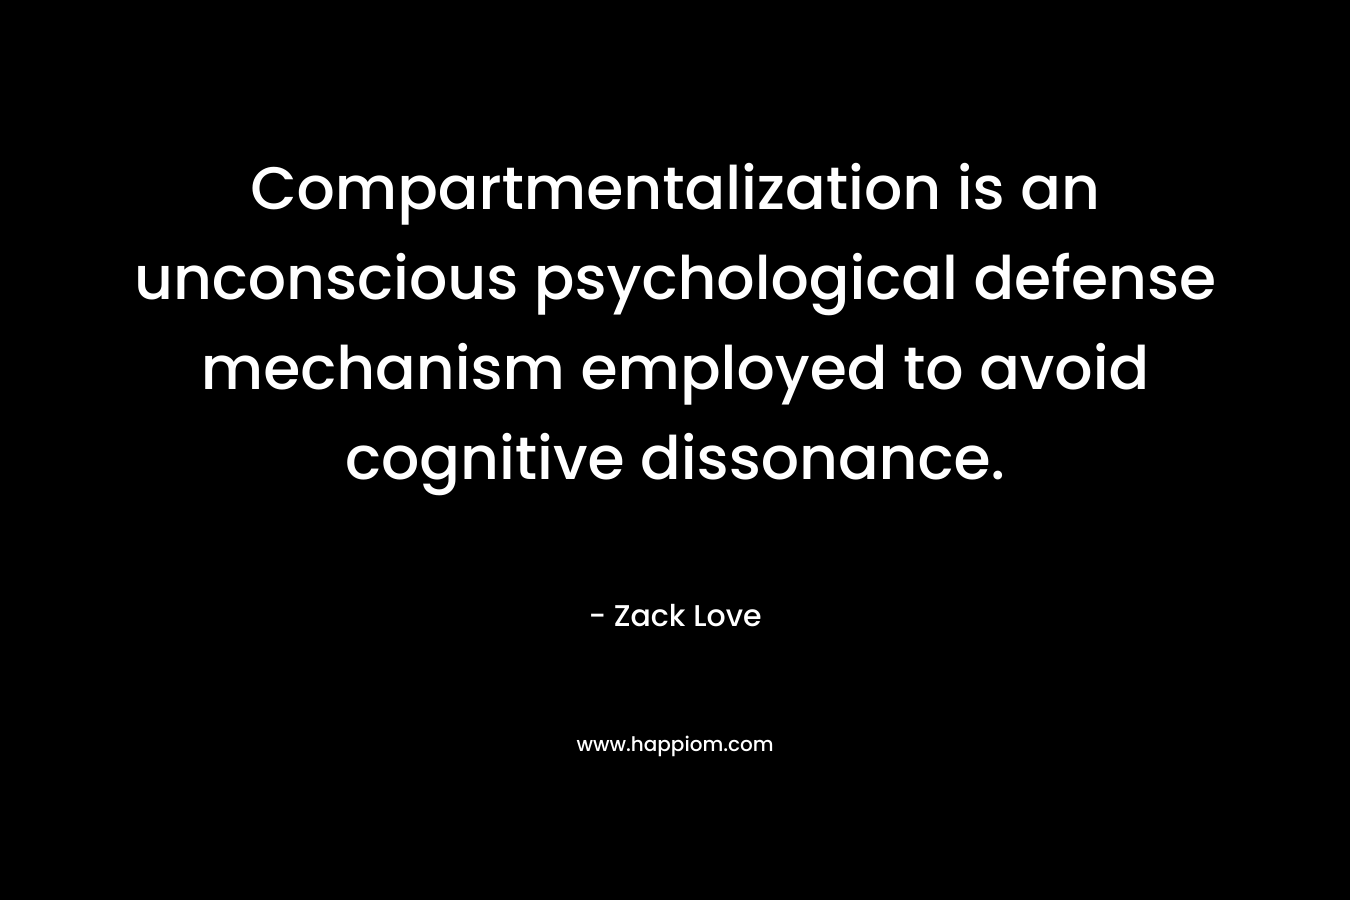 Compartmentalization is an unconscious psychological defense mechanism employed to avoid cognitive dissonance. – Zack Love